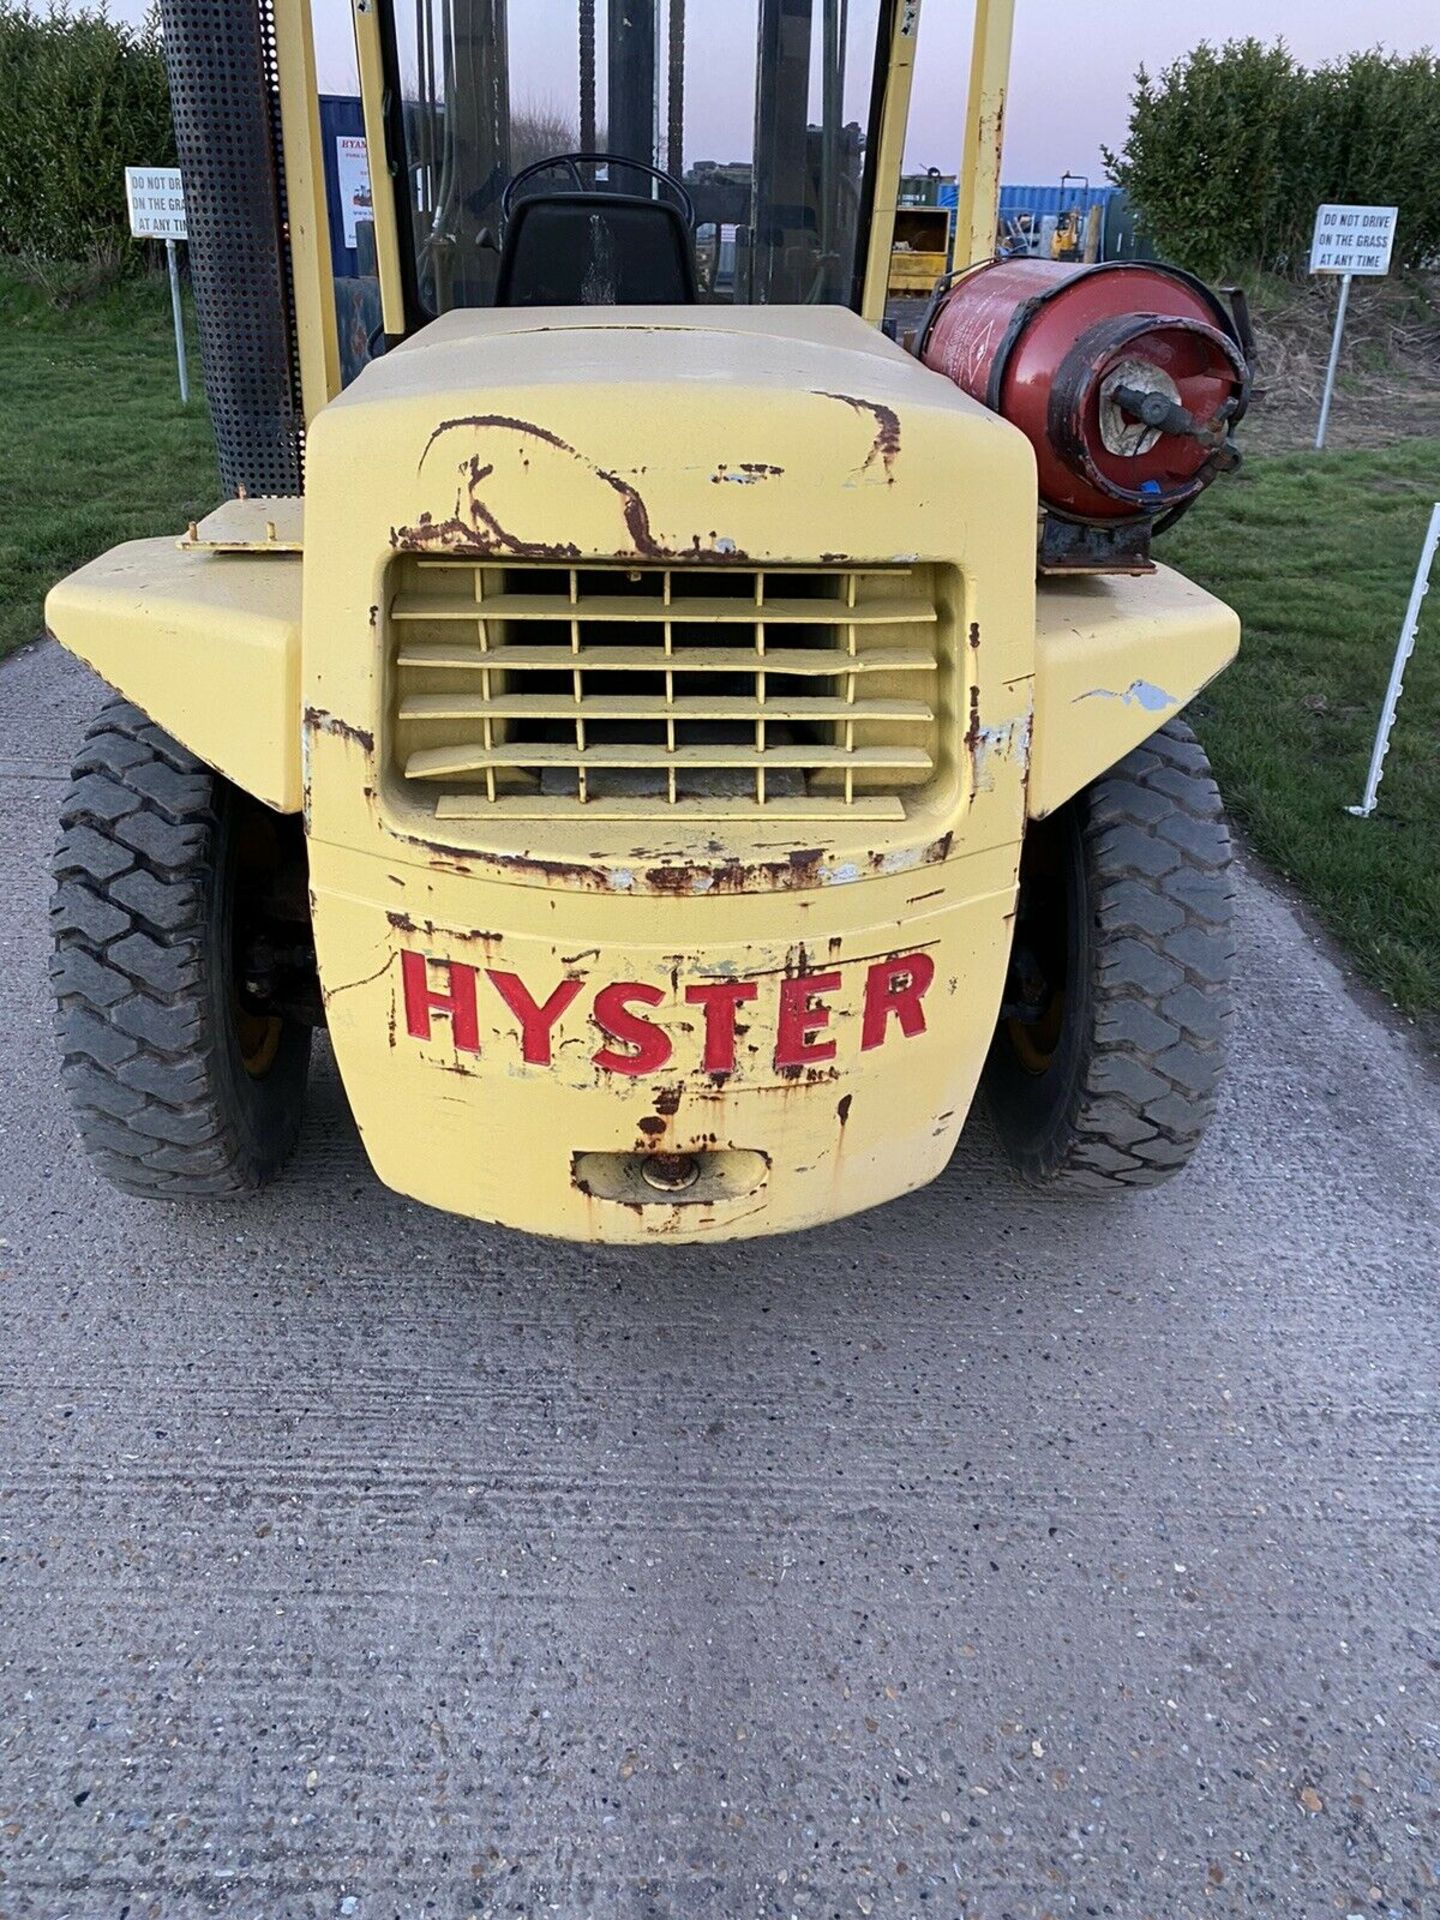 Hyster gas forklift - Image 2 of 7